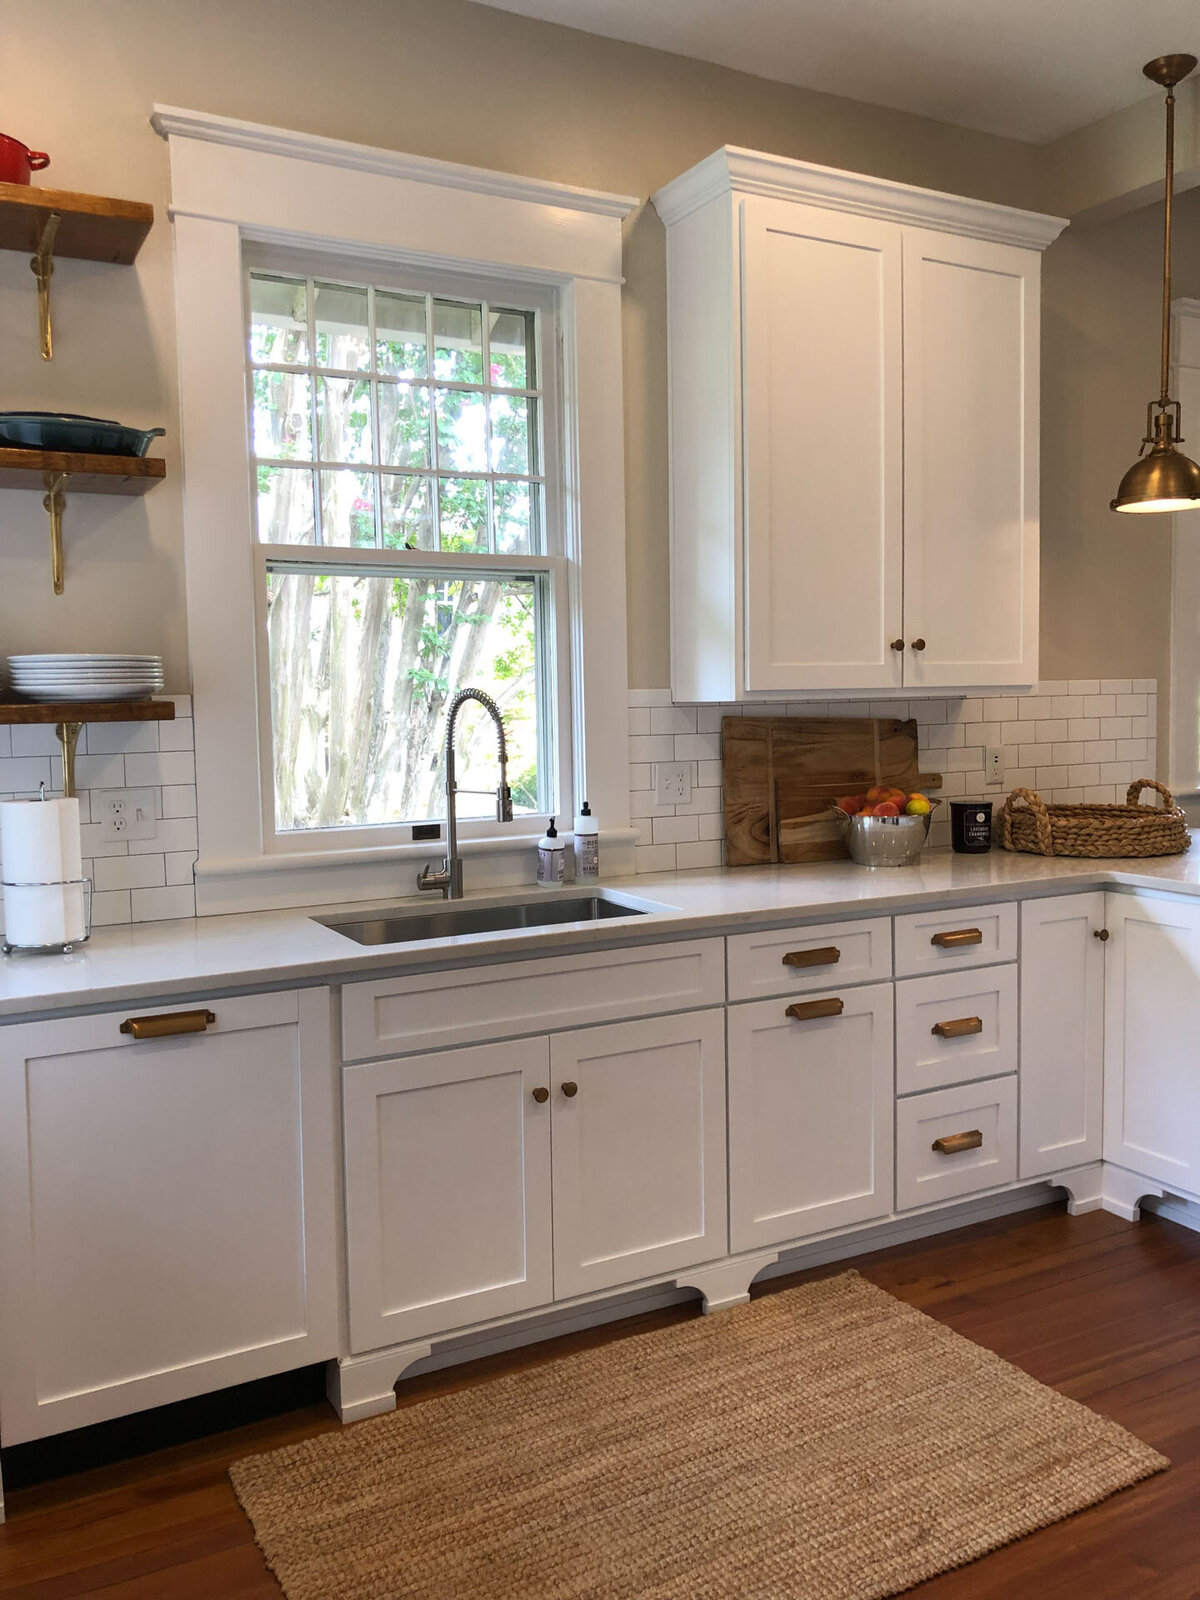 client-kitchens-historic-renovation-heather-homes41